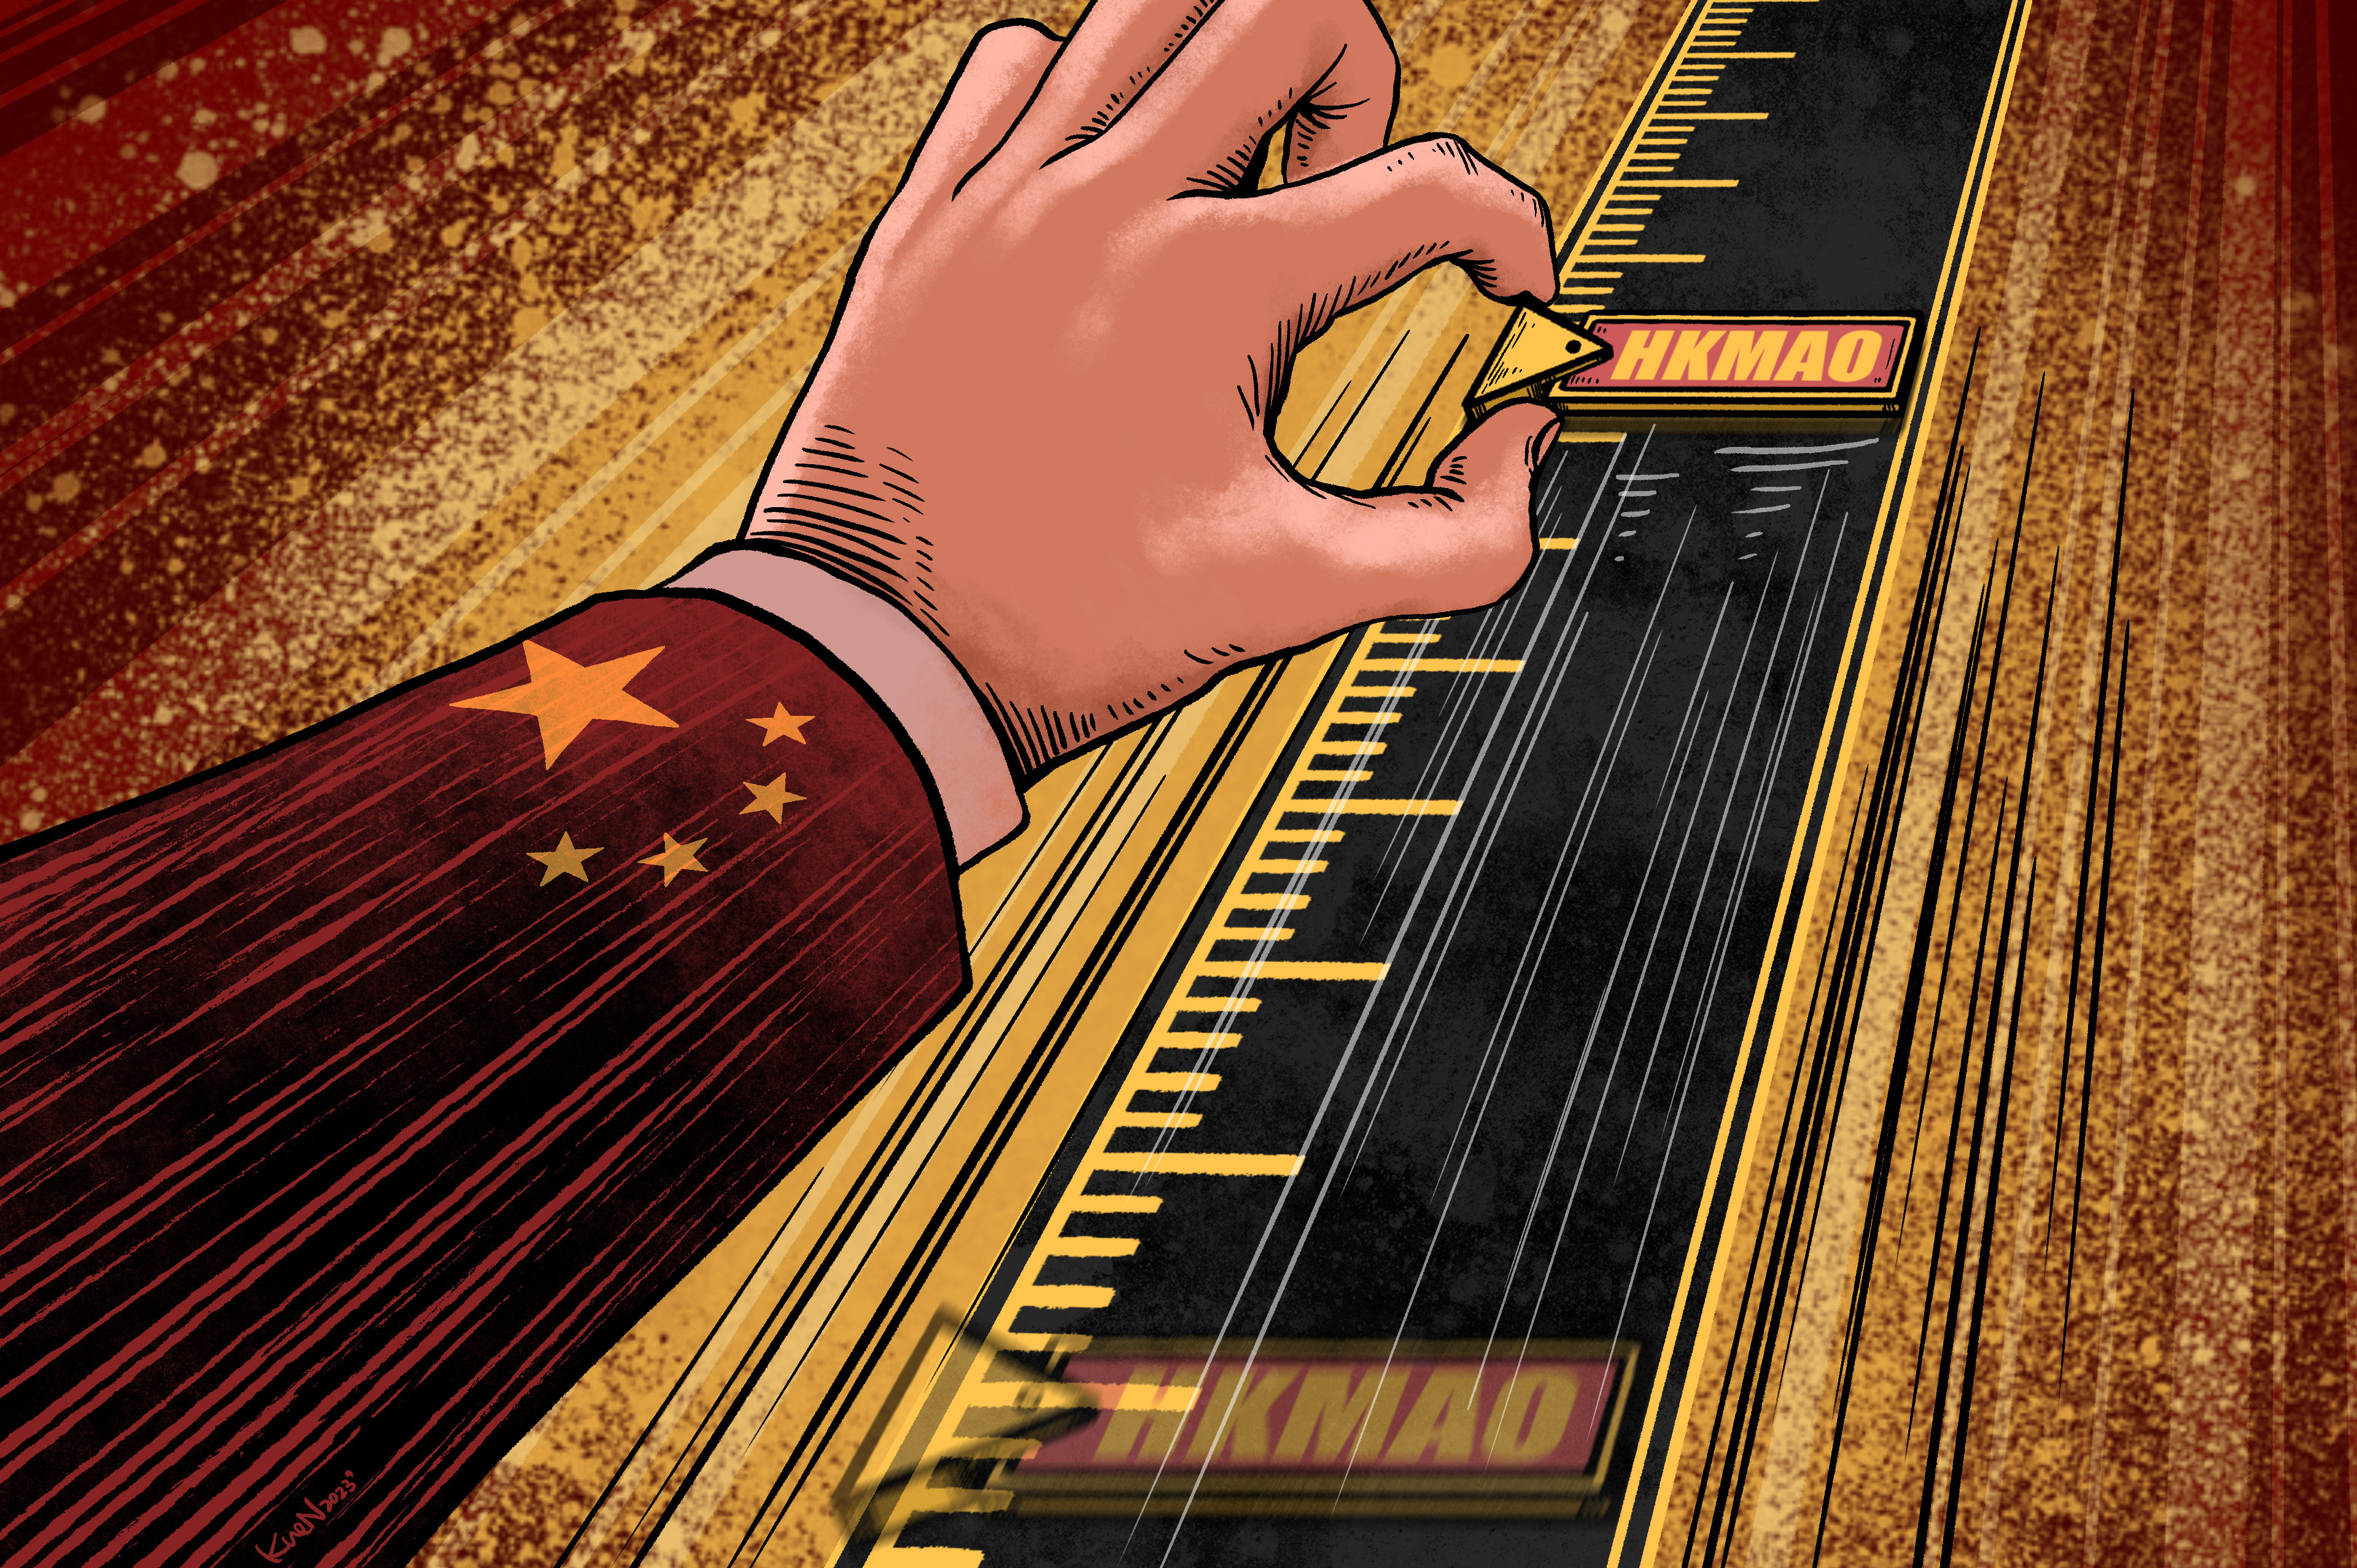 Observers have said the latest political reshuffle underscores Hong Kong’s importance to China’s overall development plans. Illustration: Lau Ka-kuen